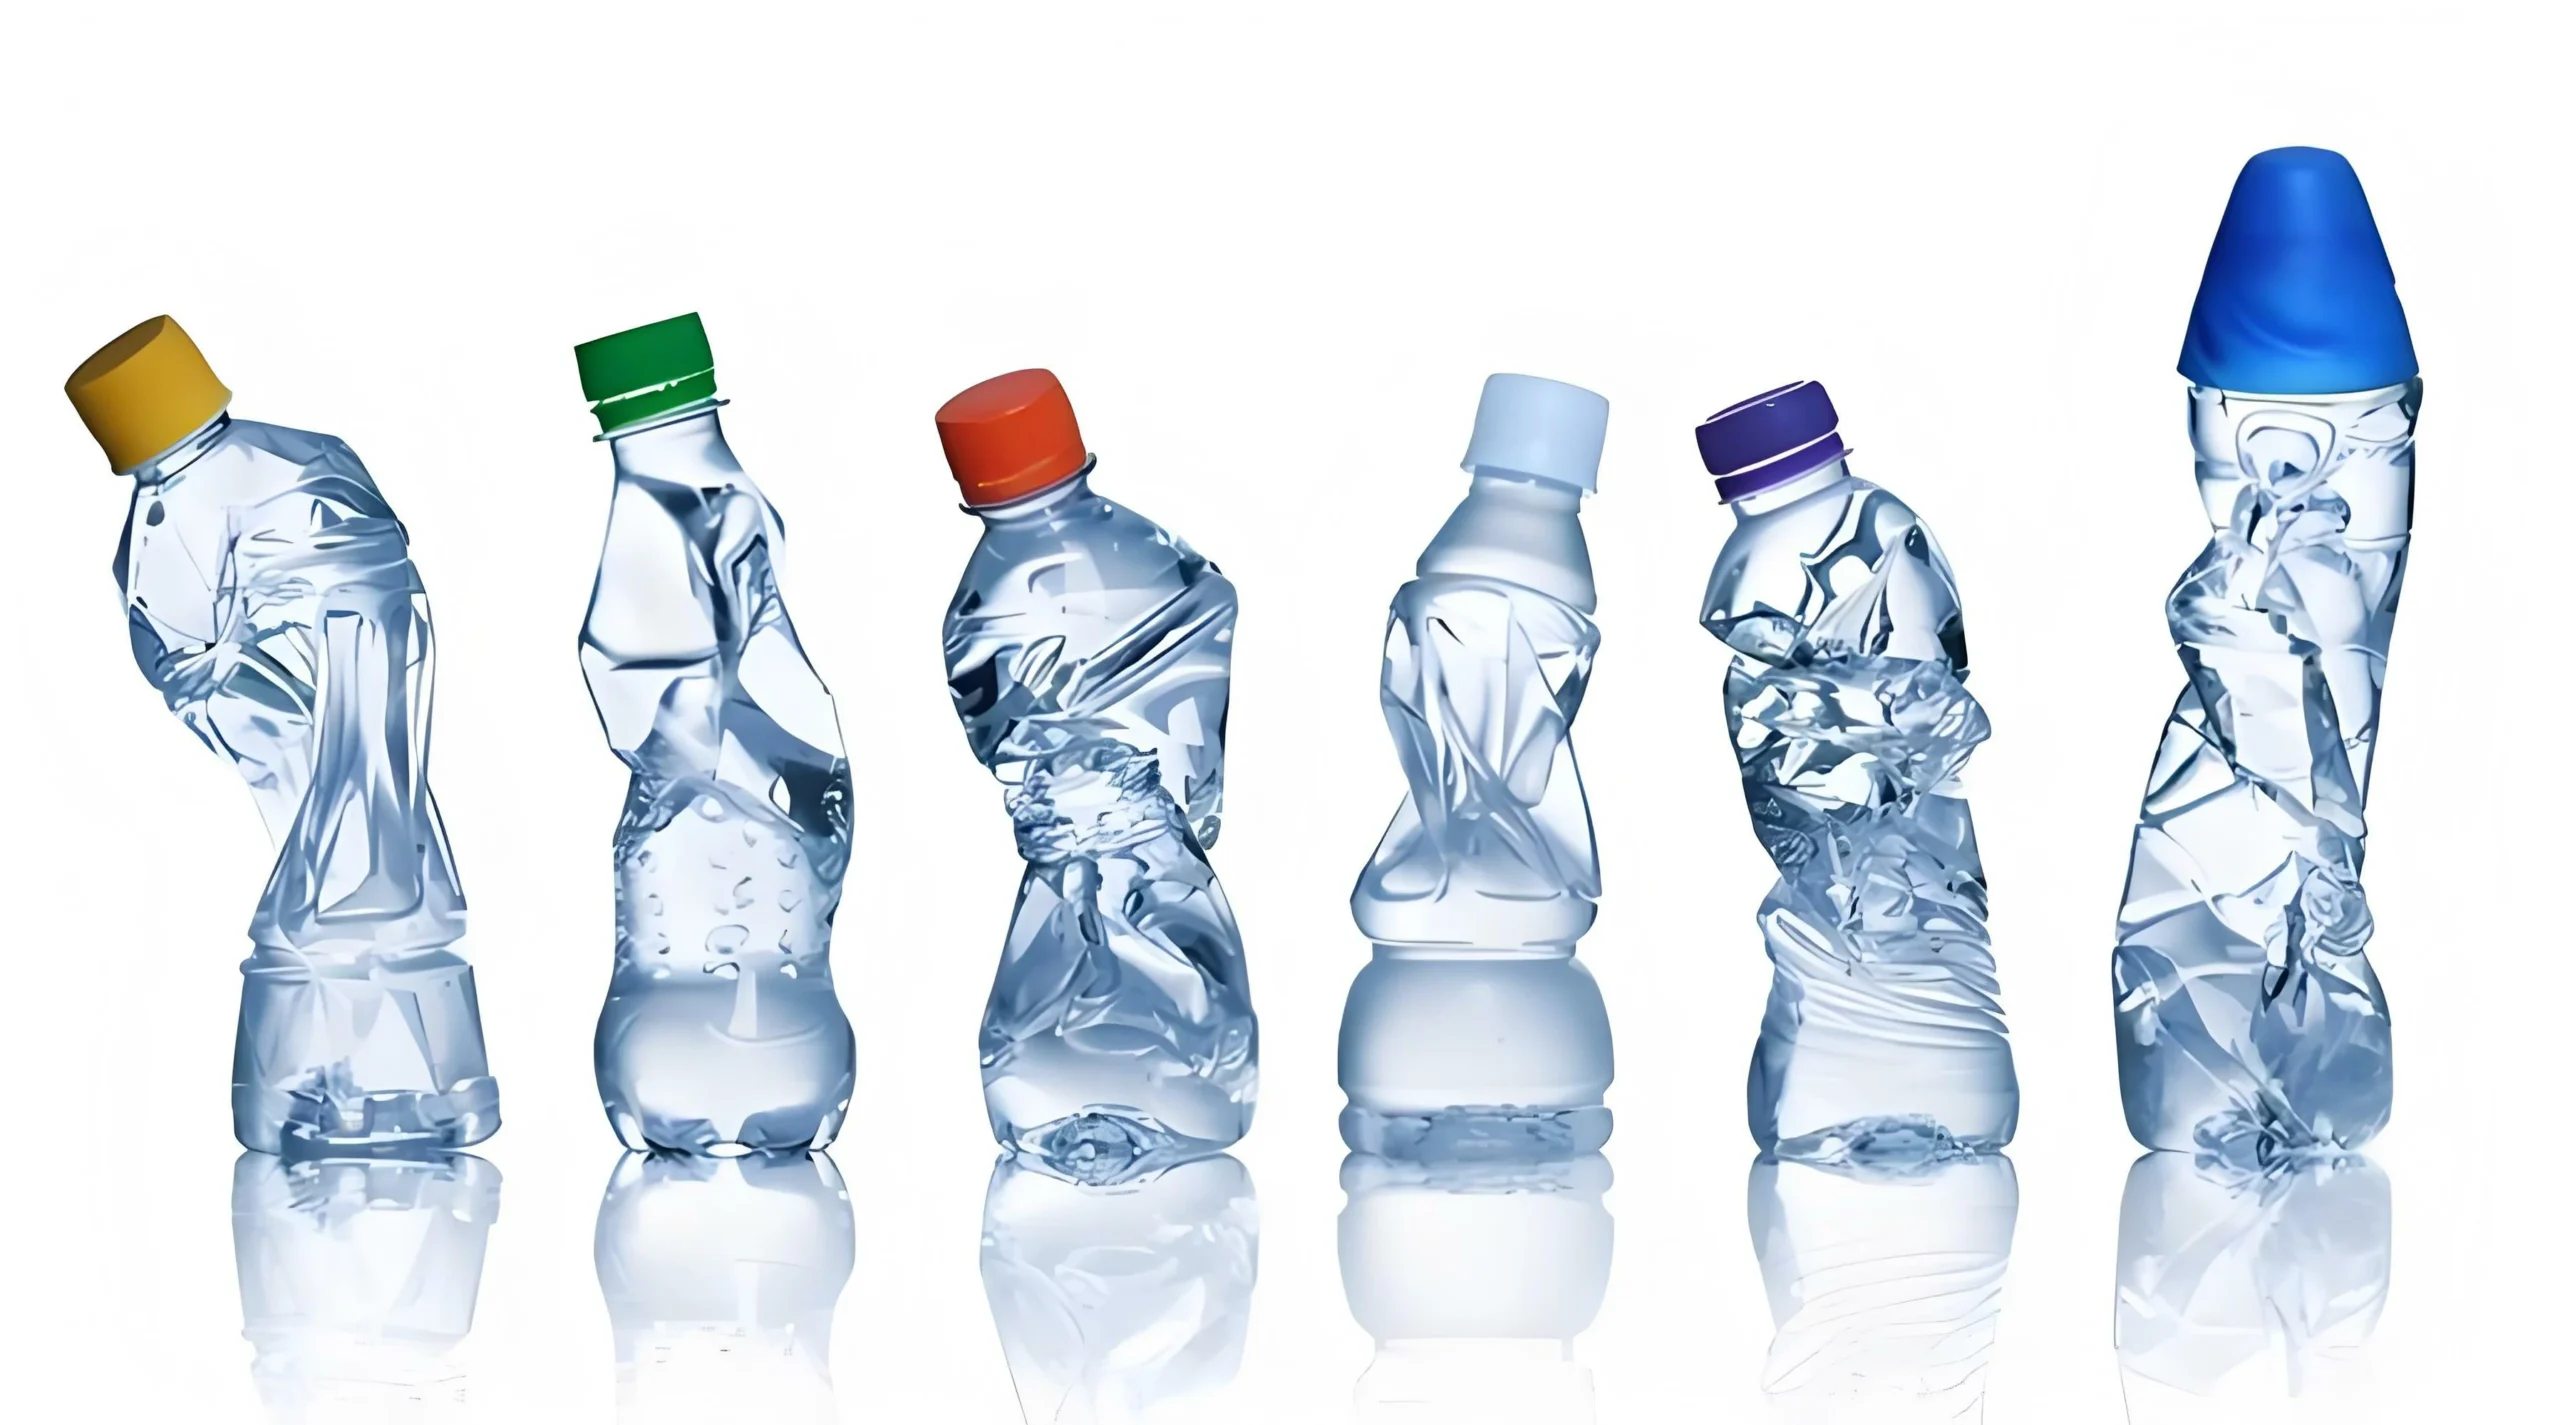 When plastic is made, it releases toxic chemicals into the atmosphere which contribute to global warming.